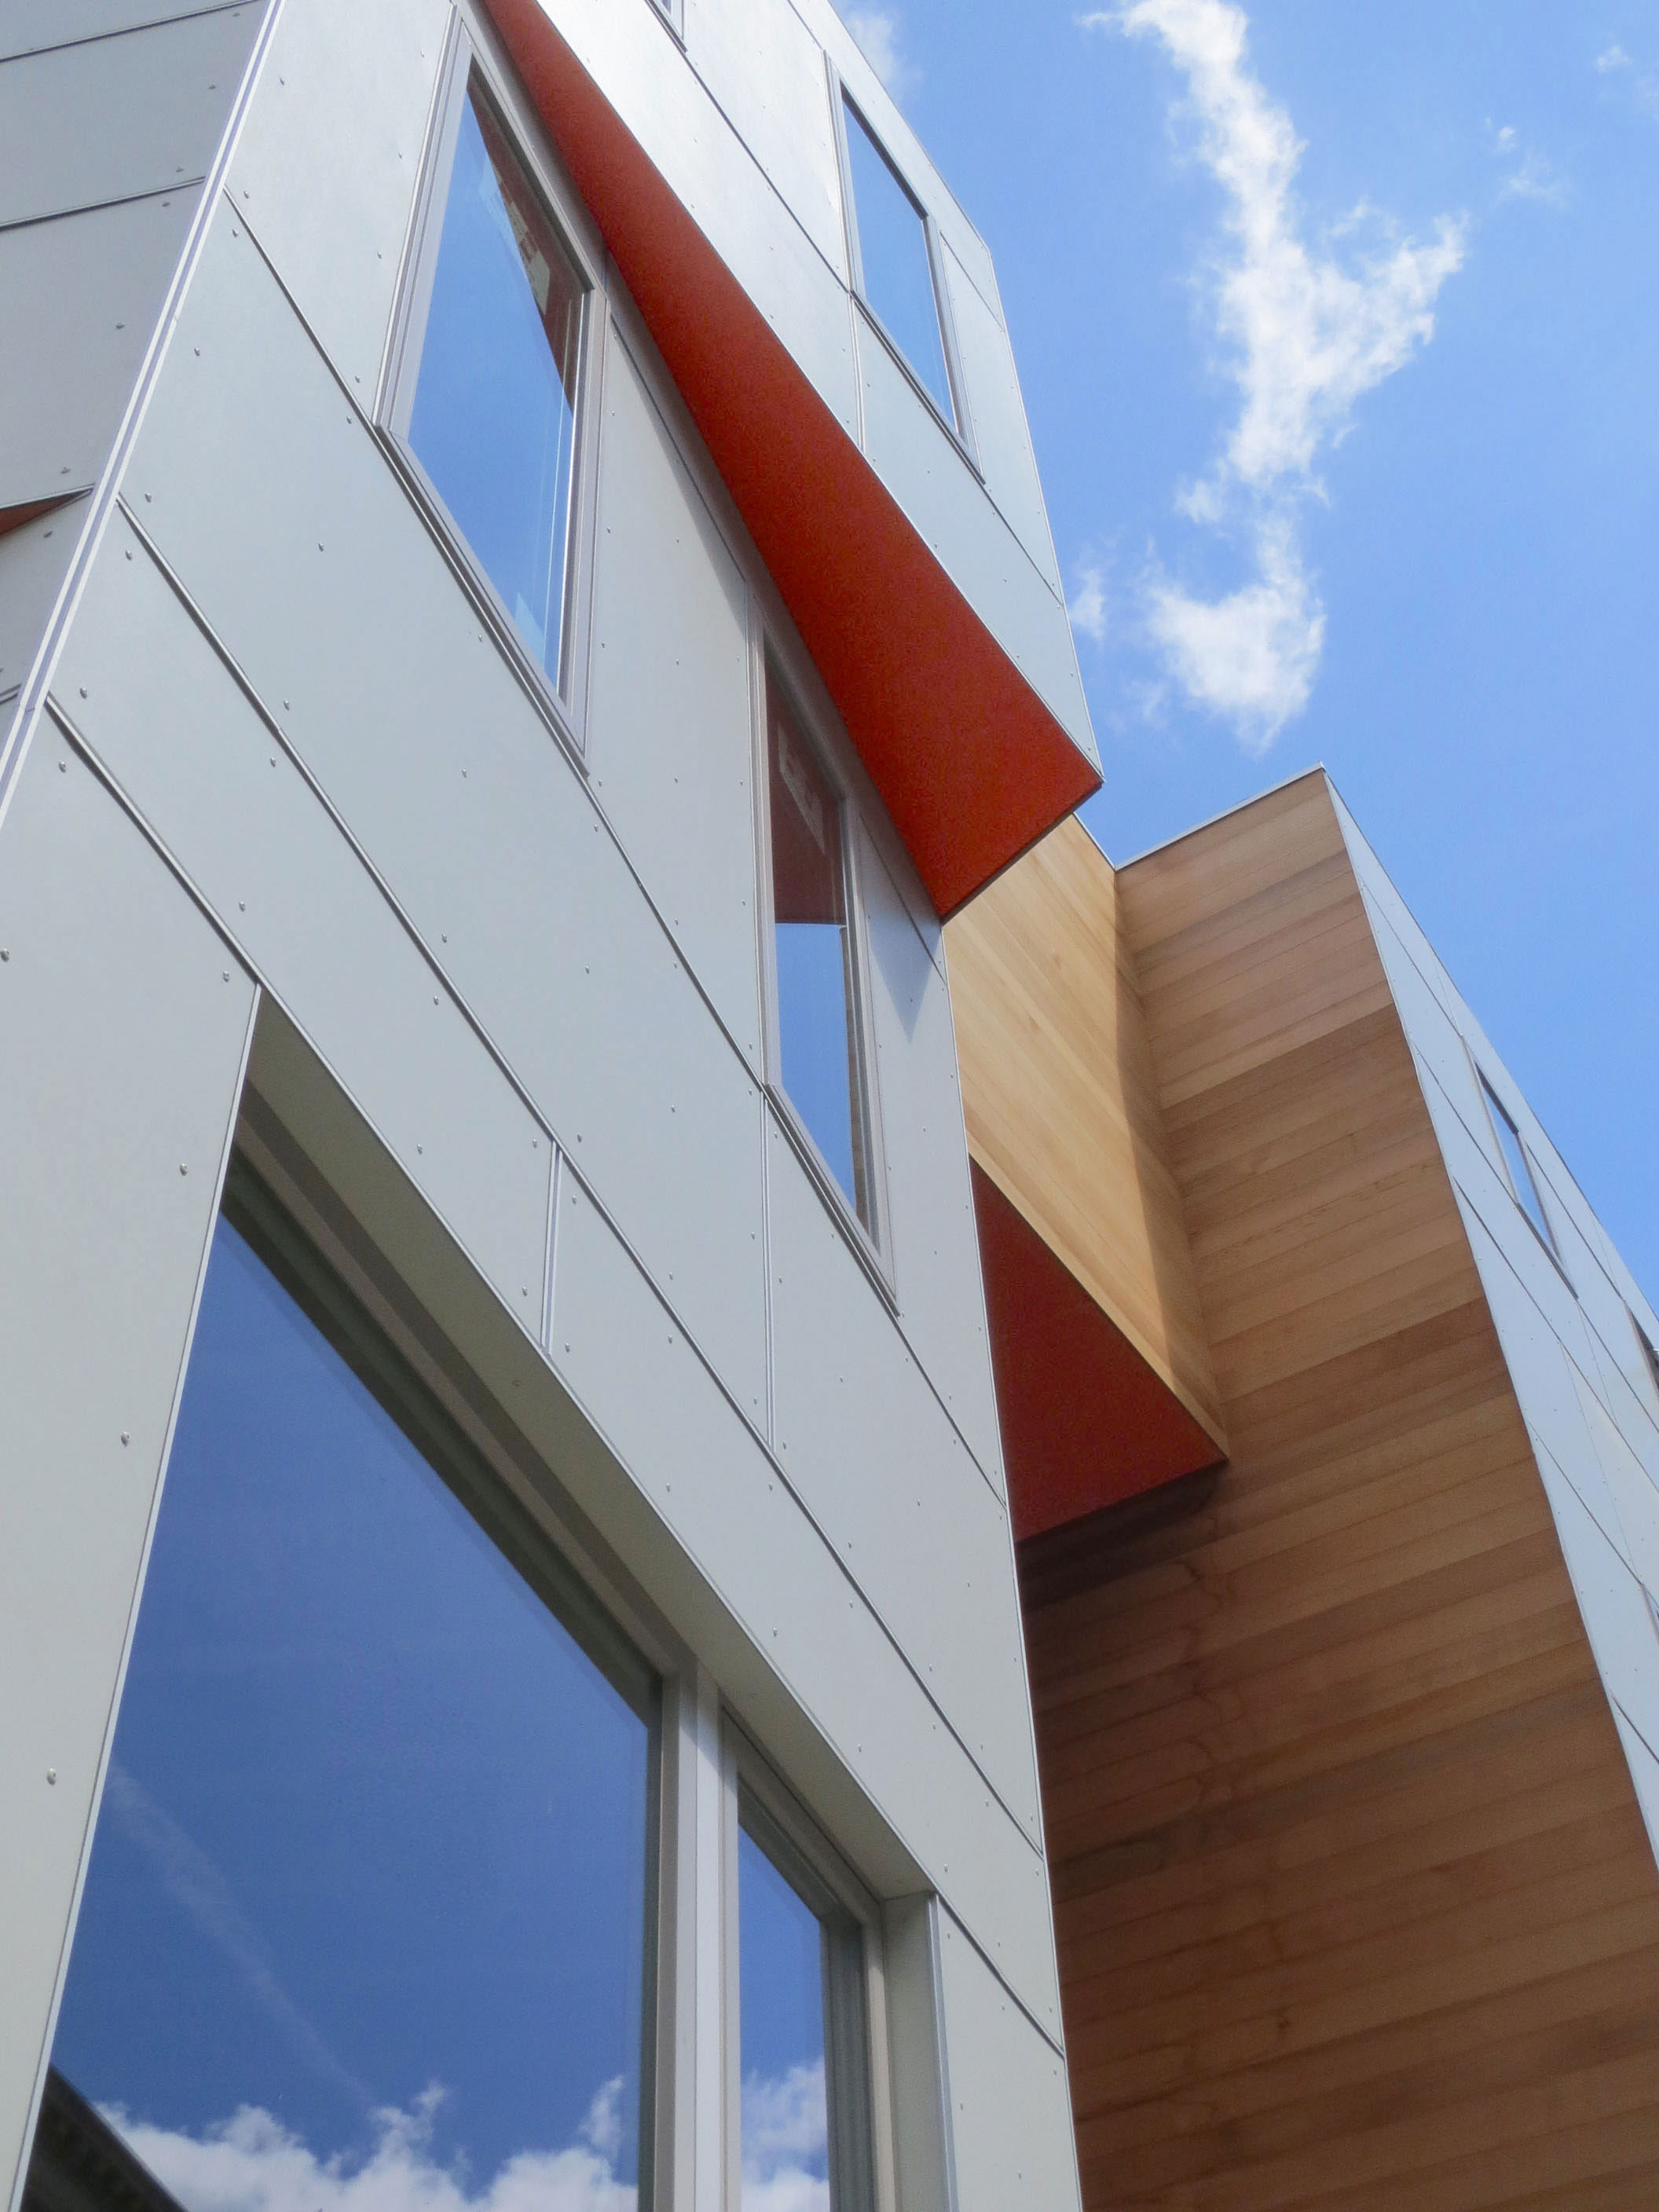 Glenville Townhomes by RODE Architects. Photo: RODE Architects.